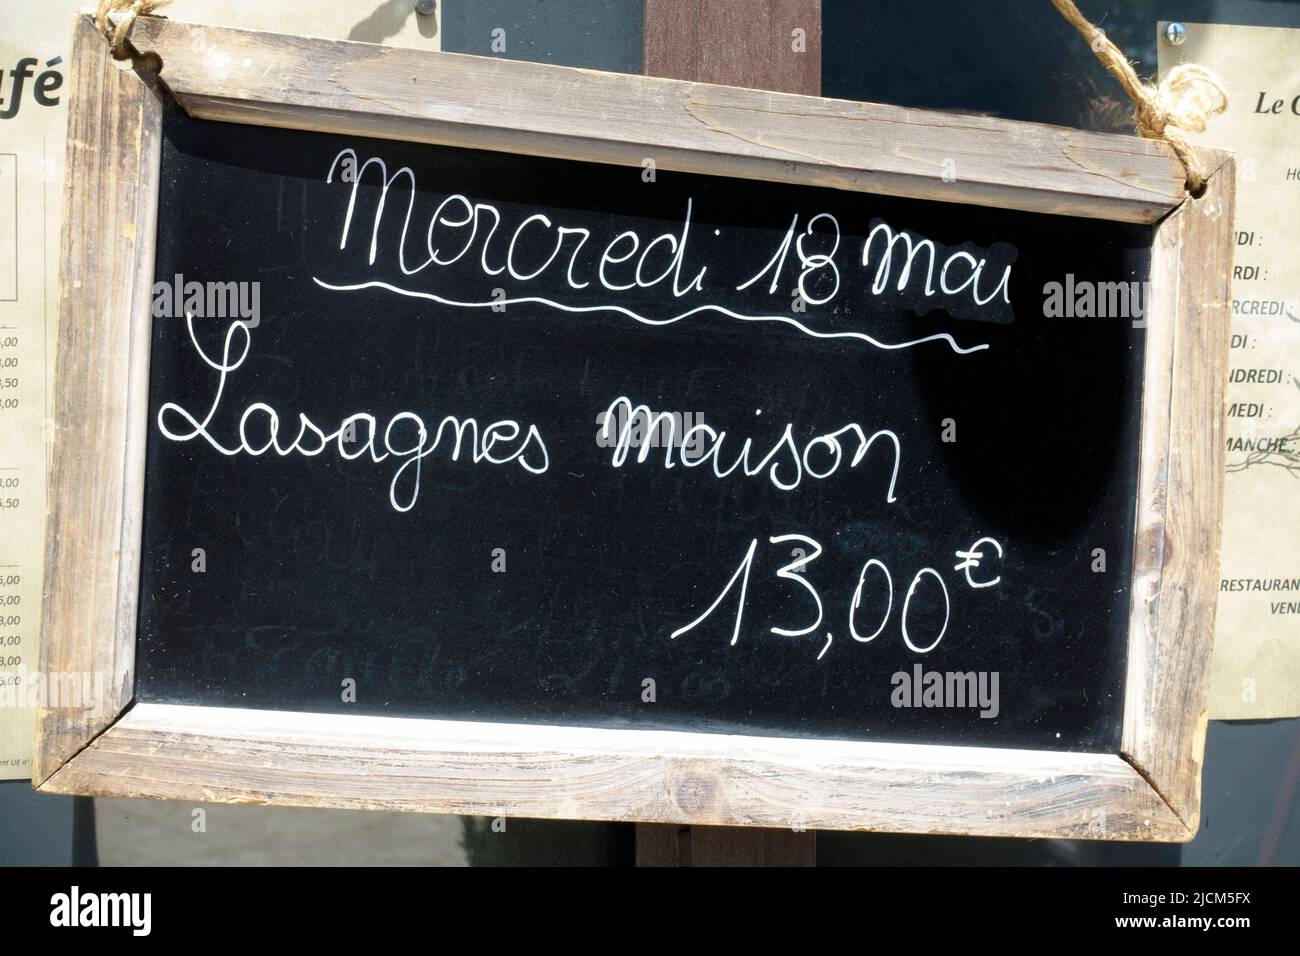 Menu sign n French at French restaurant telling the guest that the meal of the day at Wednesday 18 may is homemade lasagna and the price is 18 euros Stock Photo